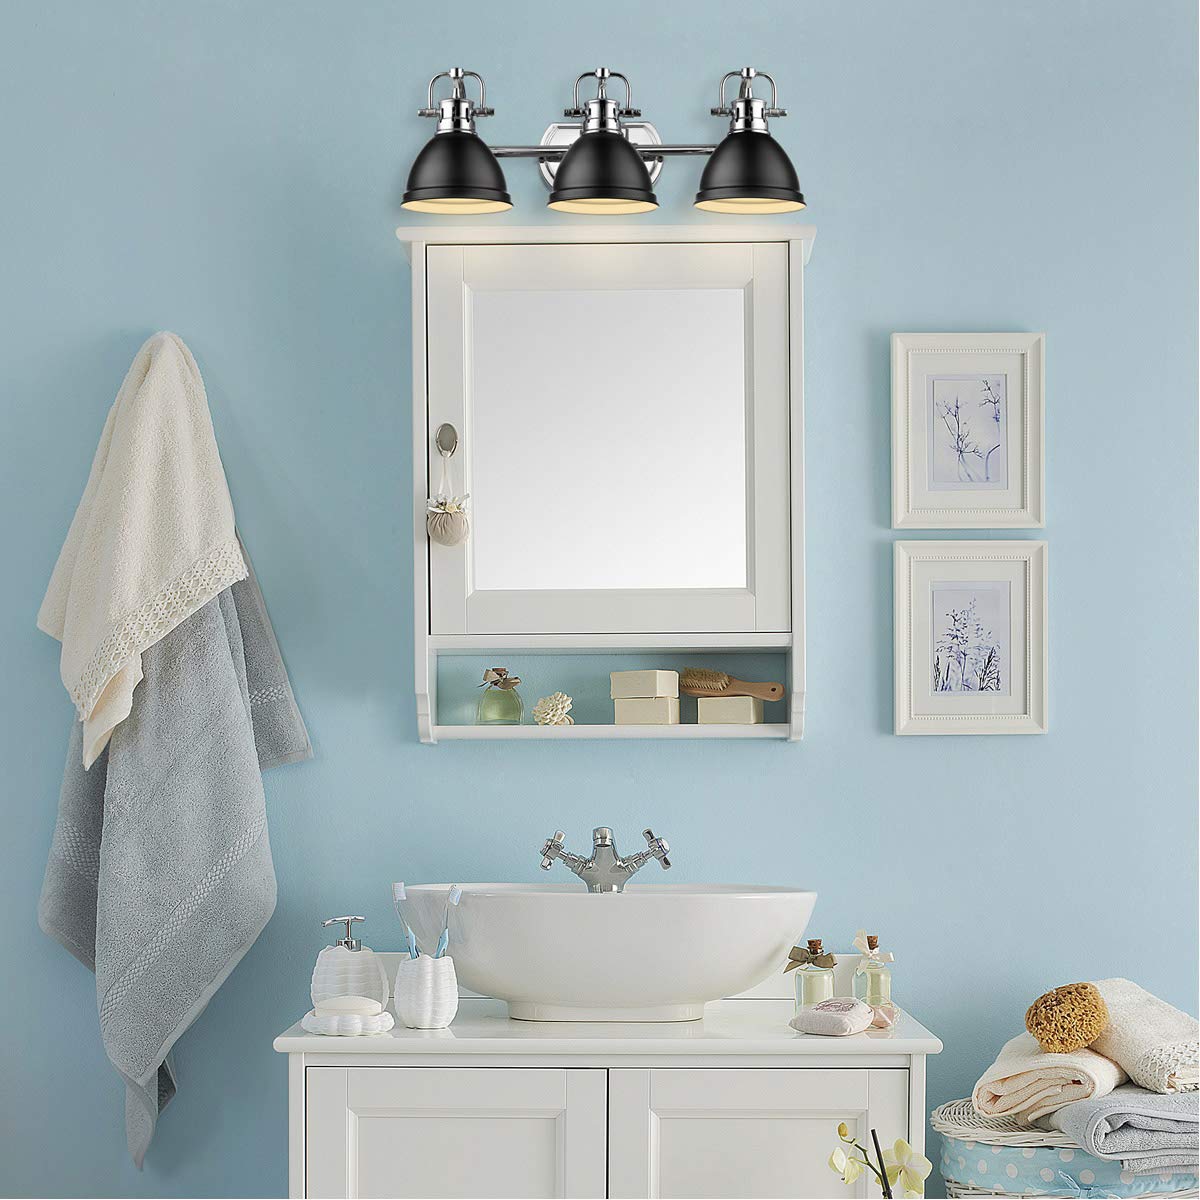 Duncan 3 Light Bath Vanity in Chrome with a Matte Black Shade